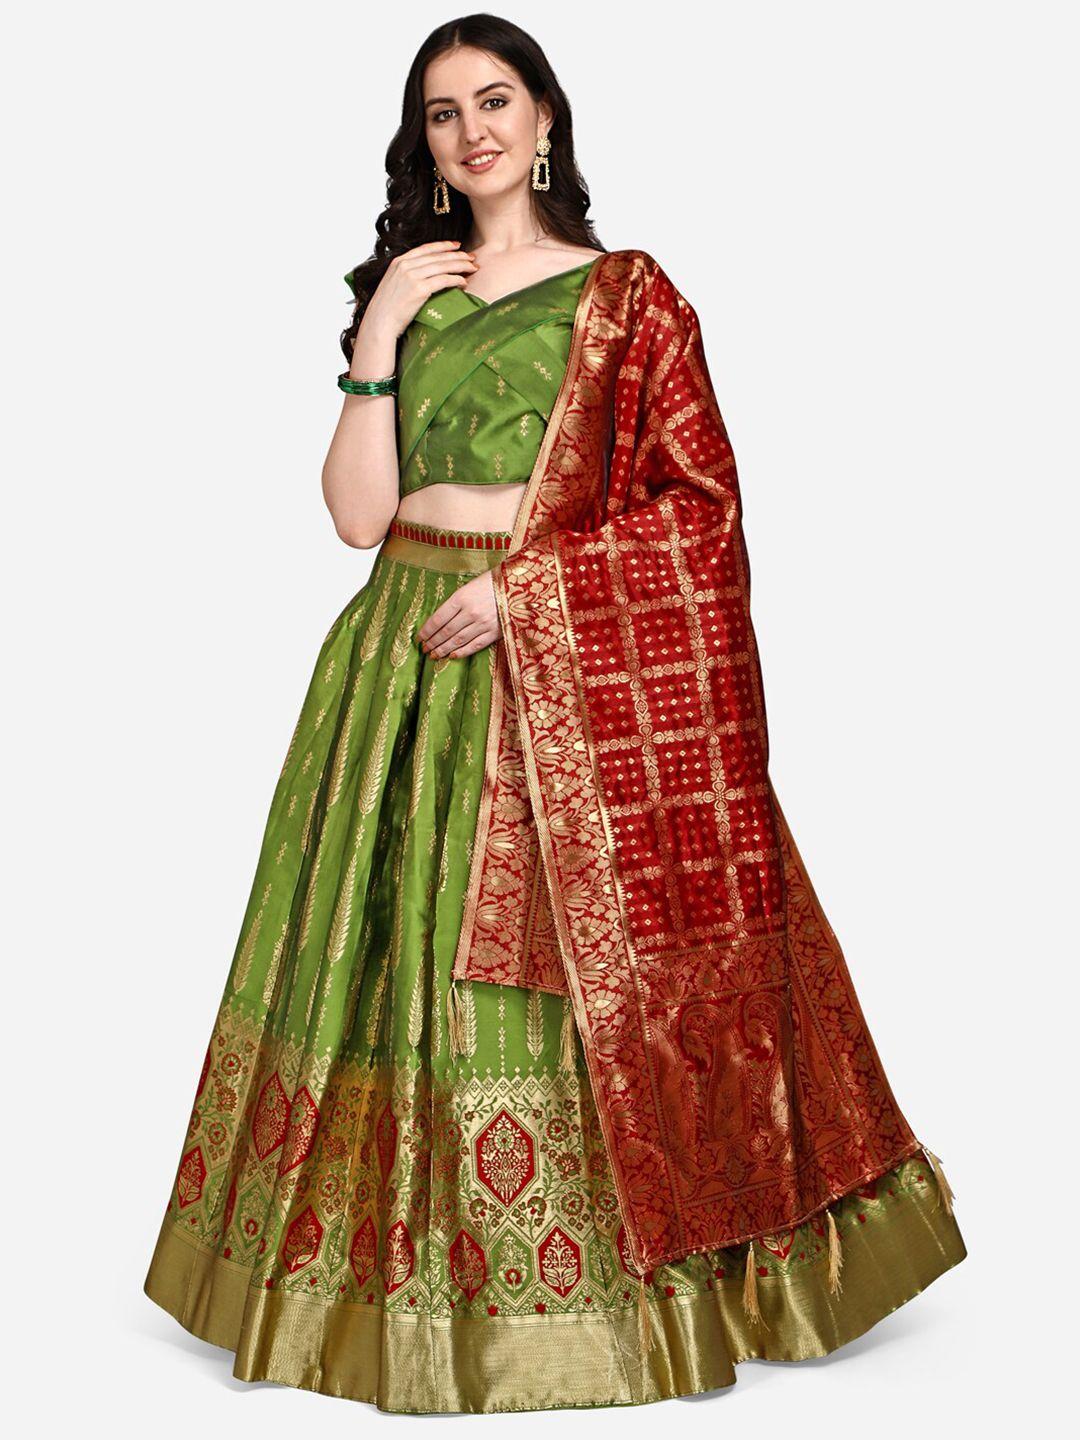 purvaja olive green & maroon ready to wear lehenga & unstitched blouse with dupatta